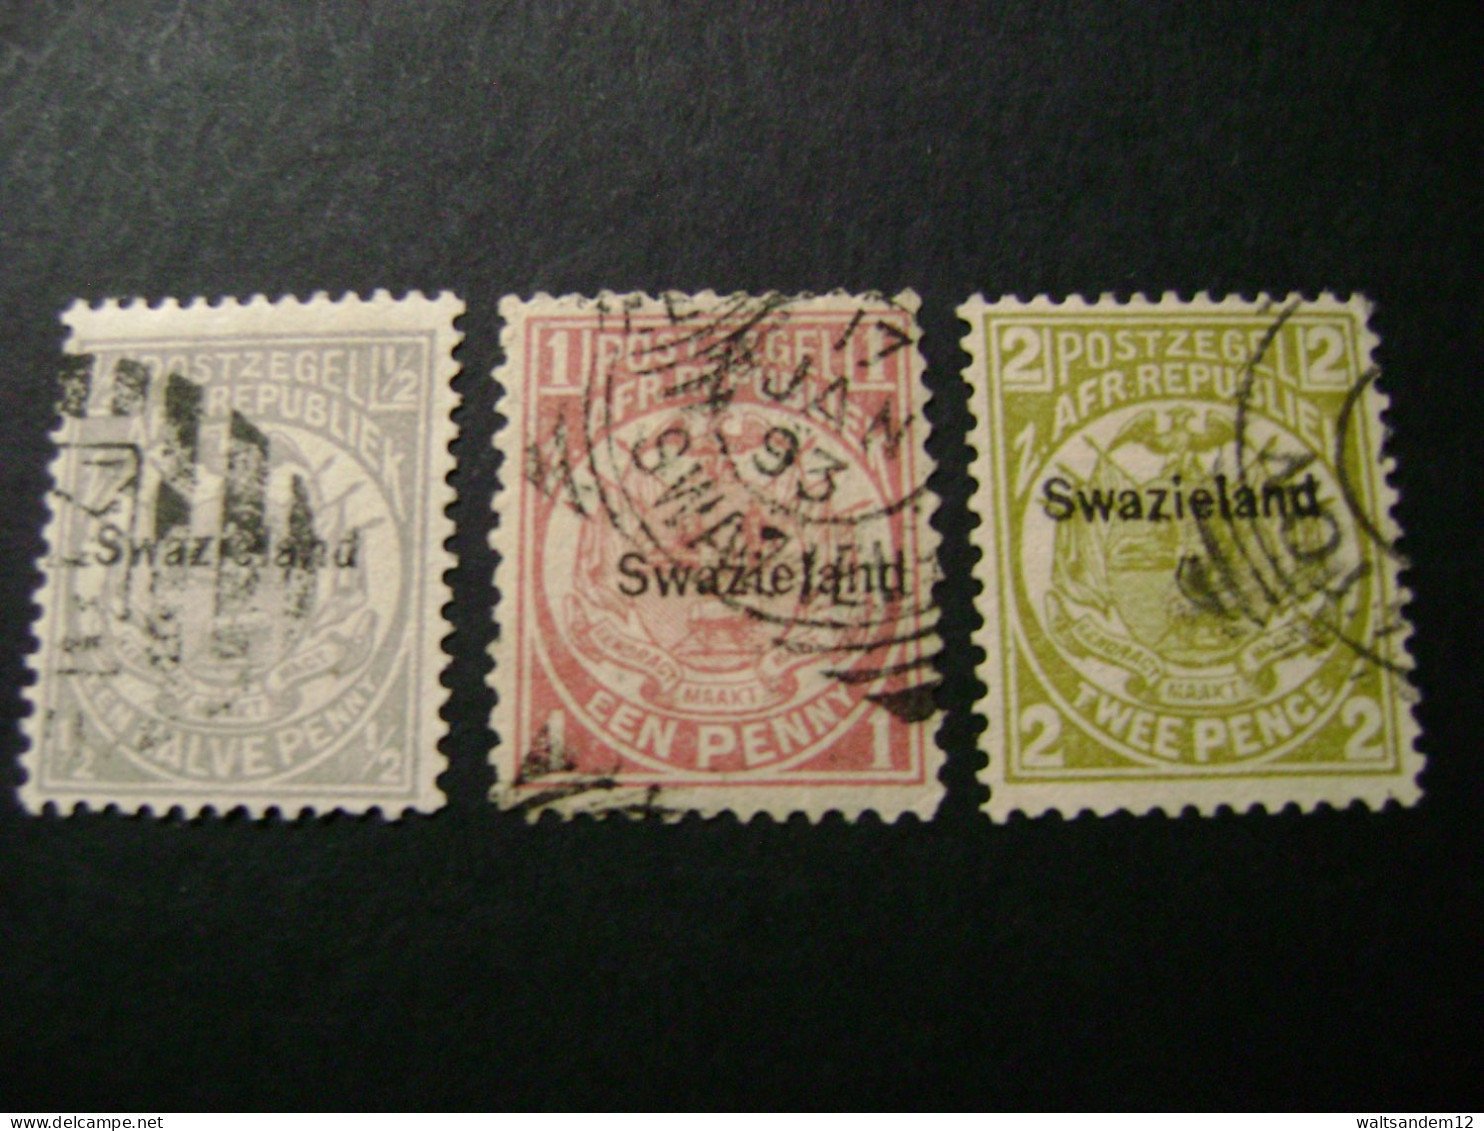 Swaziland - 1889 ½d, 1d, 2d (SG 1, 4, 5) - Used Definitive Stamps - Swasiland (...-1967)